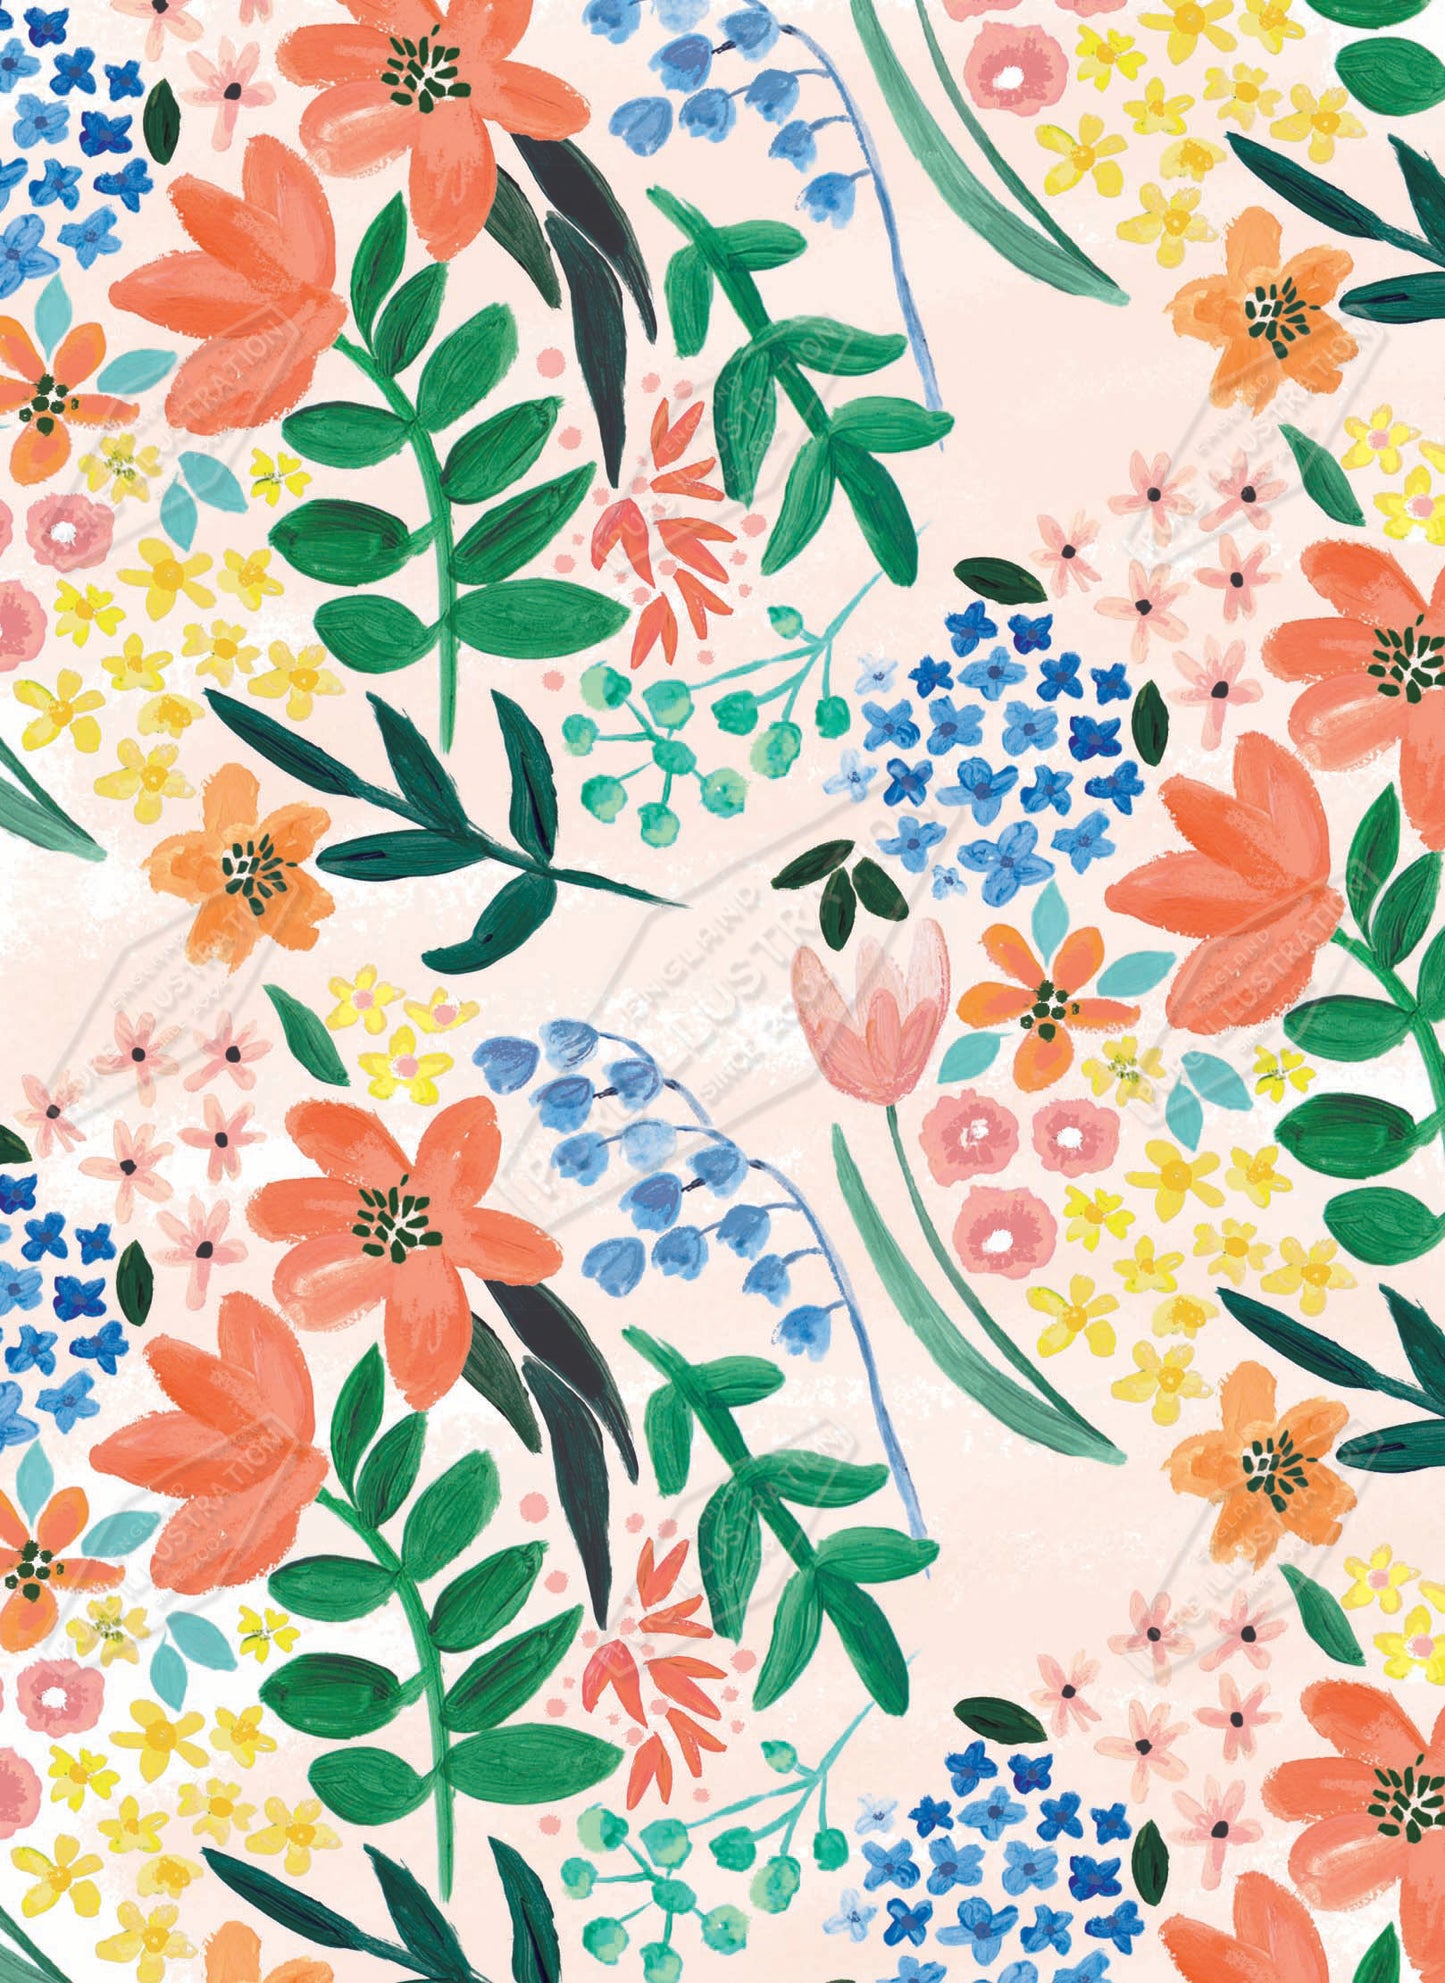 00035830SLA- Sarah Lake is represented by Pure Art Licensing Agency - Everyday Pattern Design